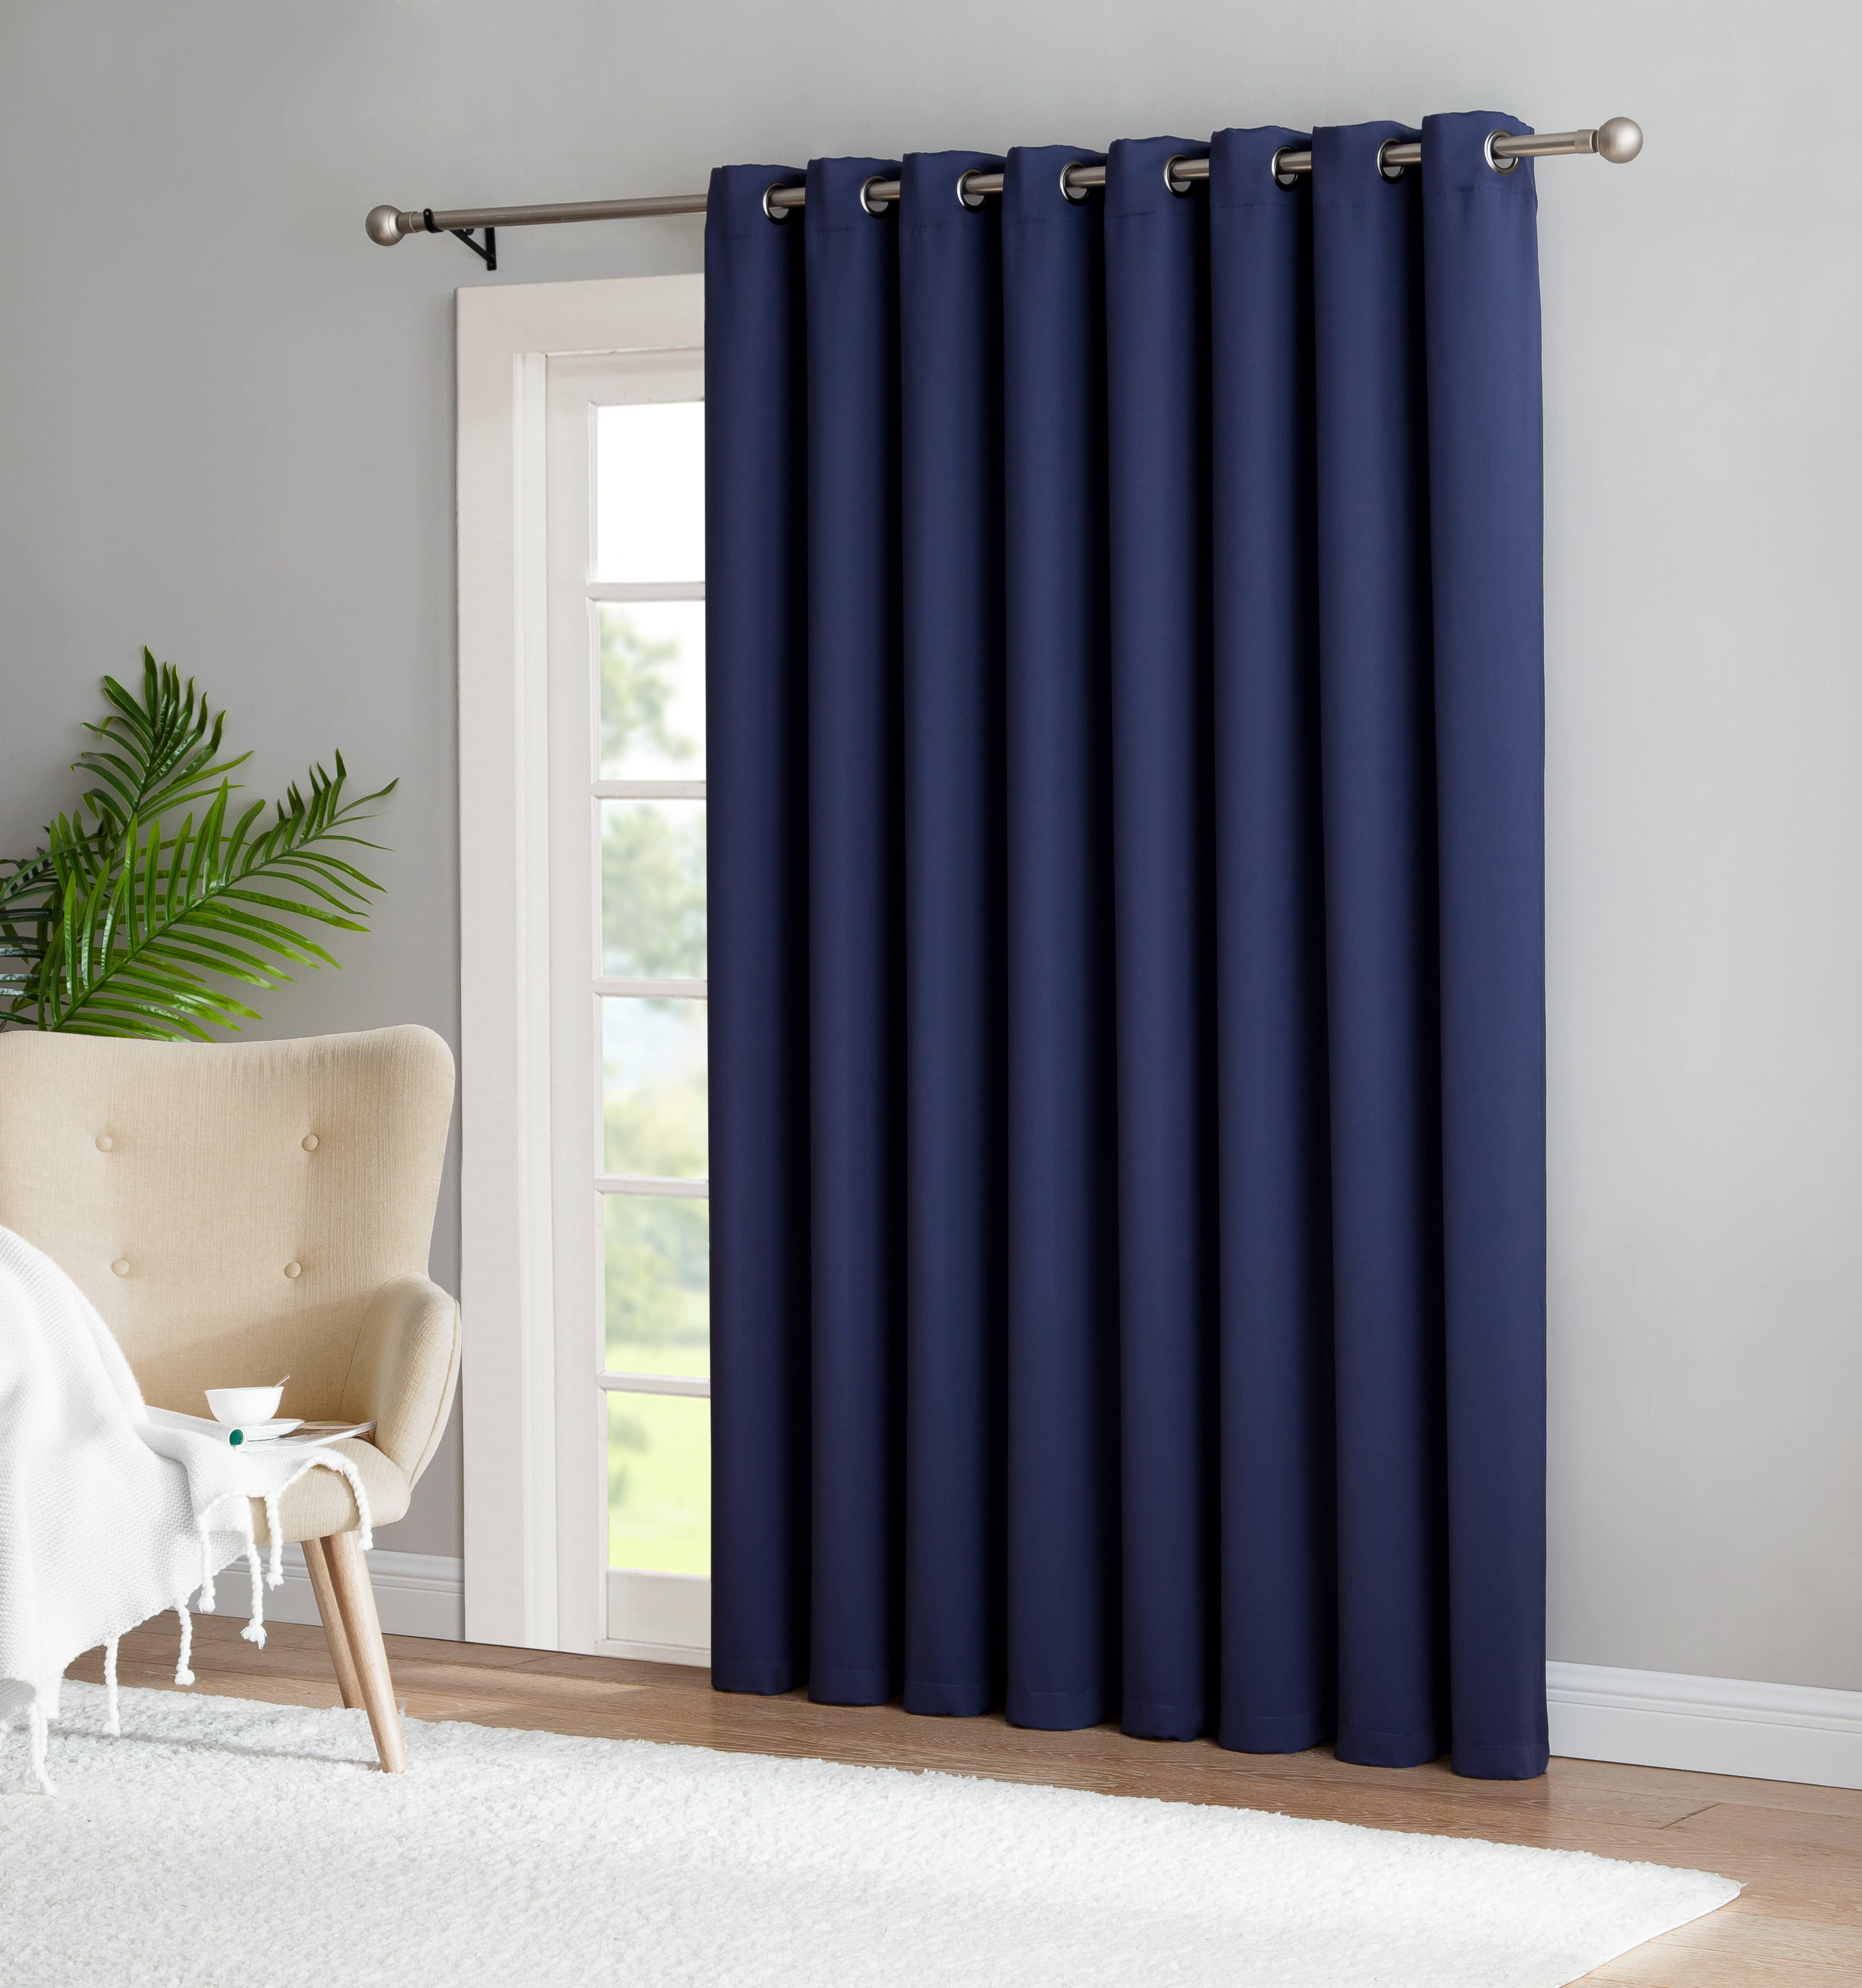 Target 96 Inch Curtains - lameredesigns